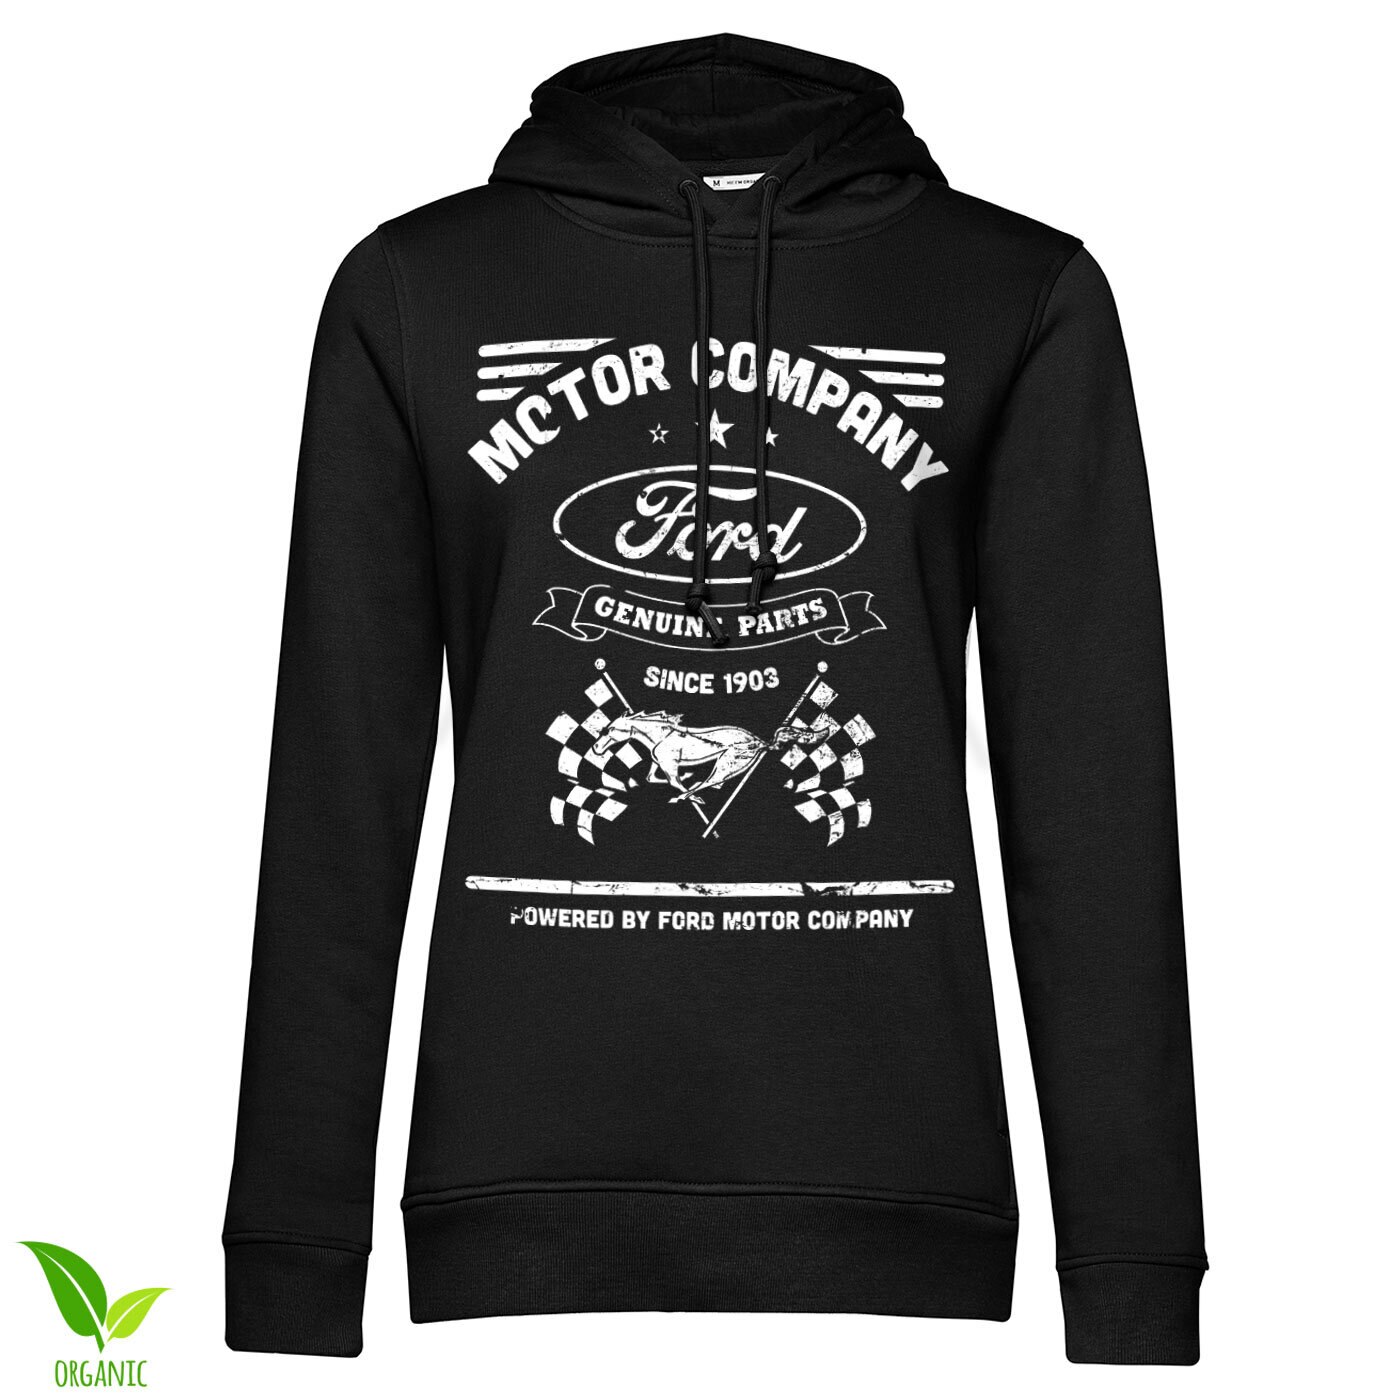 Ford - Checkers Flag Girls Hoodie